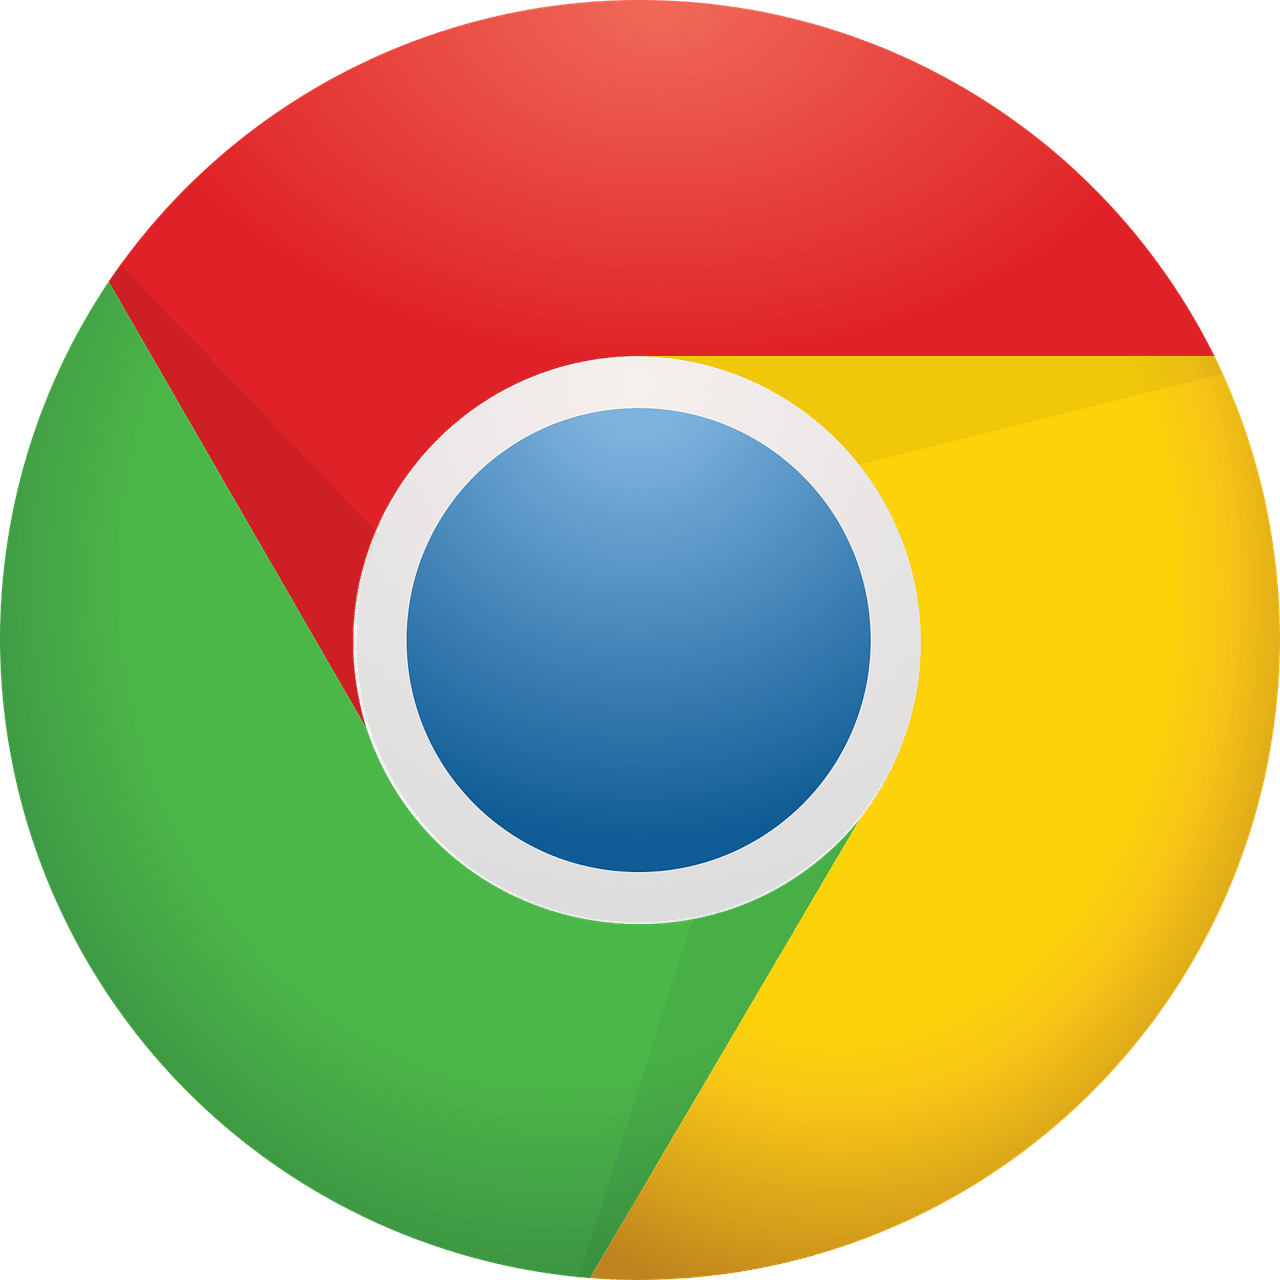 Chrome 64-bit for Android finally runs on